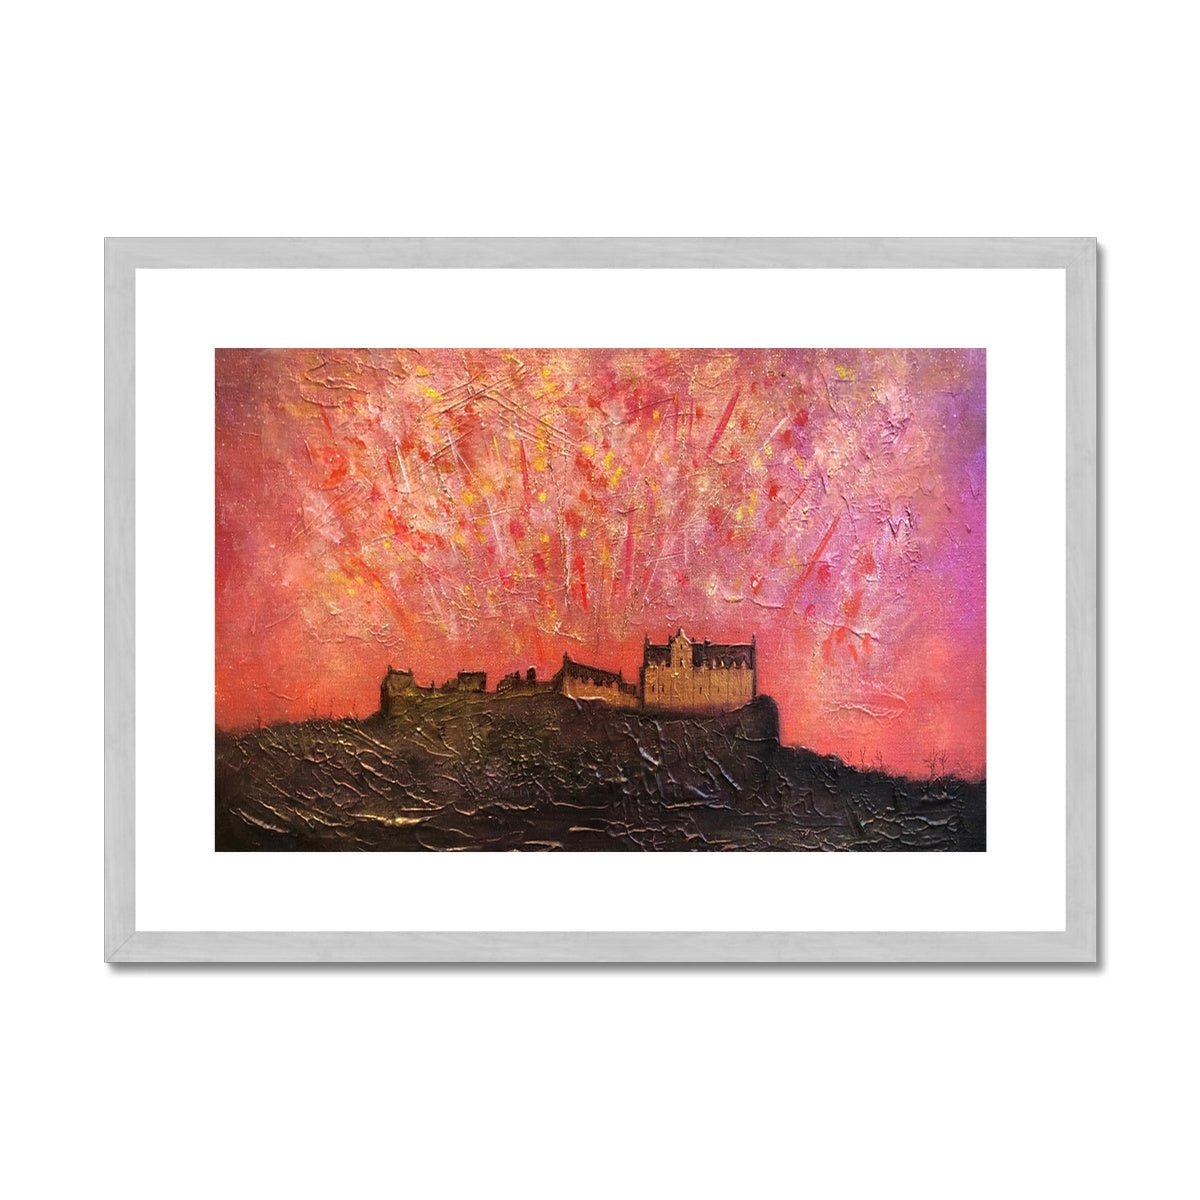 Edinburgh Castle Fireworks Painting | Antique Framed & Mounted Prints From Scotland-Antique Framed & Mounted Prints-Edinburgh & Glasgow Art Gallery-A2 Landscape-Silver Frame-Paintings, Prints, Homeware, Art Gifts From Scotland By Scottish Artist Kevin Hunter